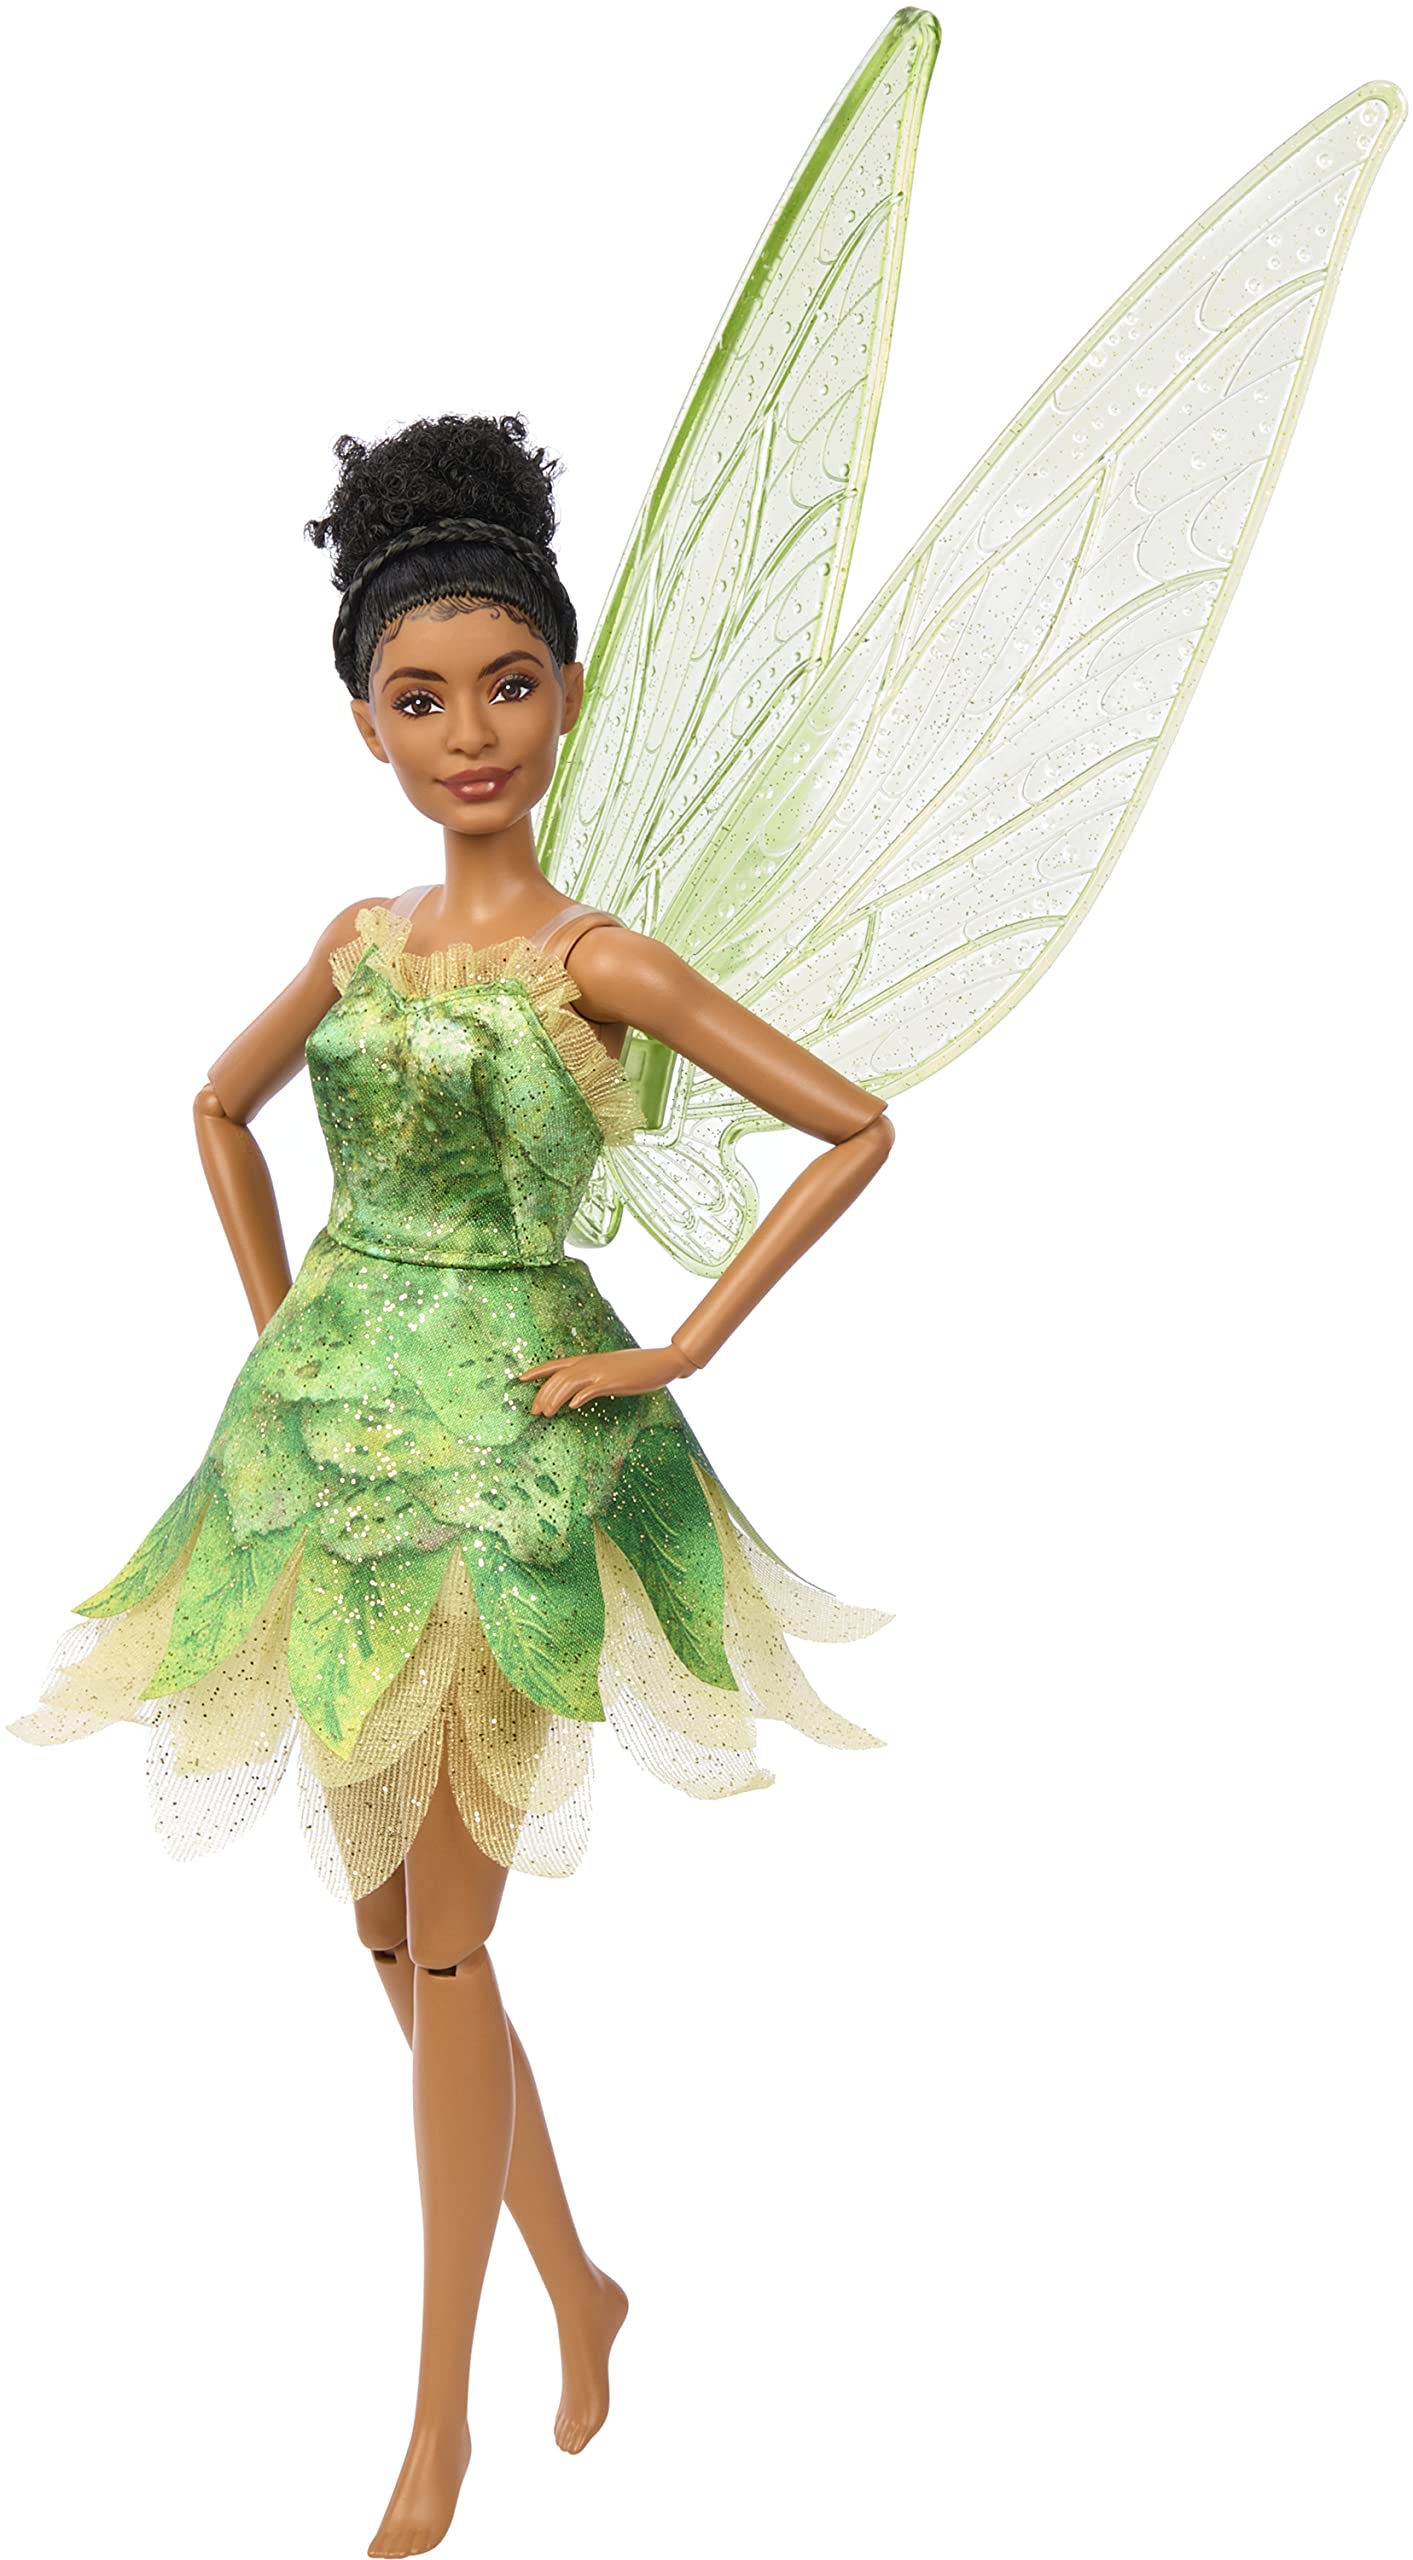 Disney Movie Peter Pan & Wendy Toys, Tinker Bell Fairy Doll with Wings, Collectible Inspired by Disney's Peter Pan & Wendy